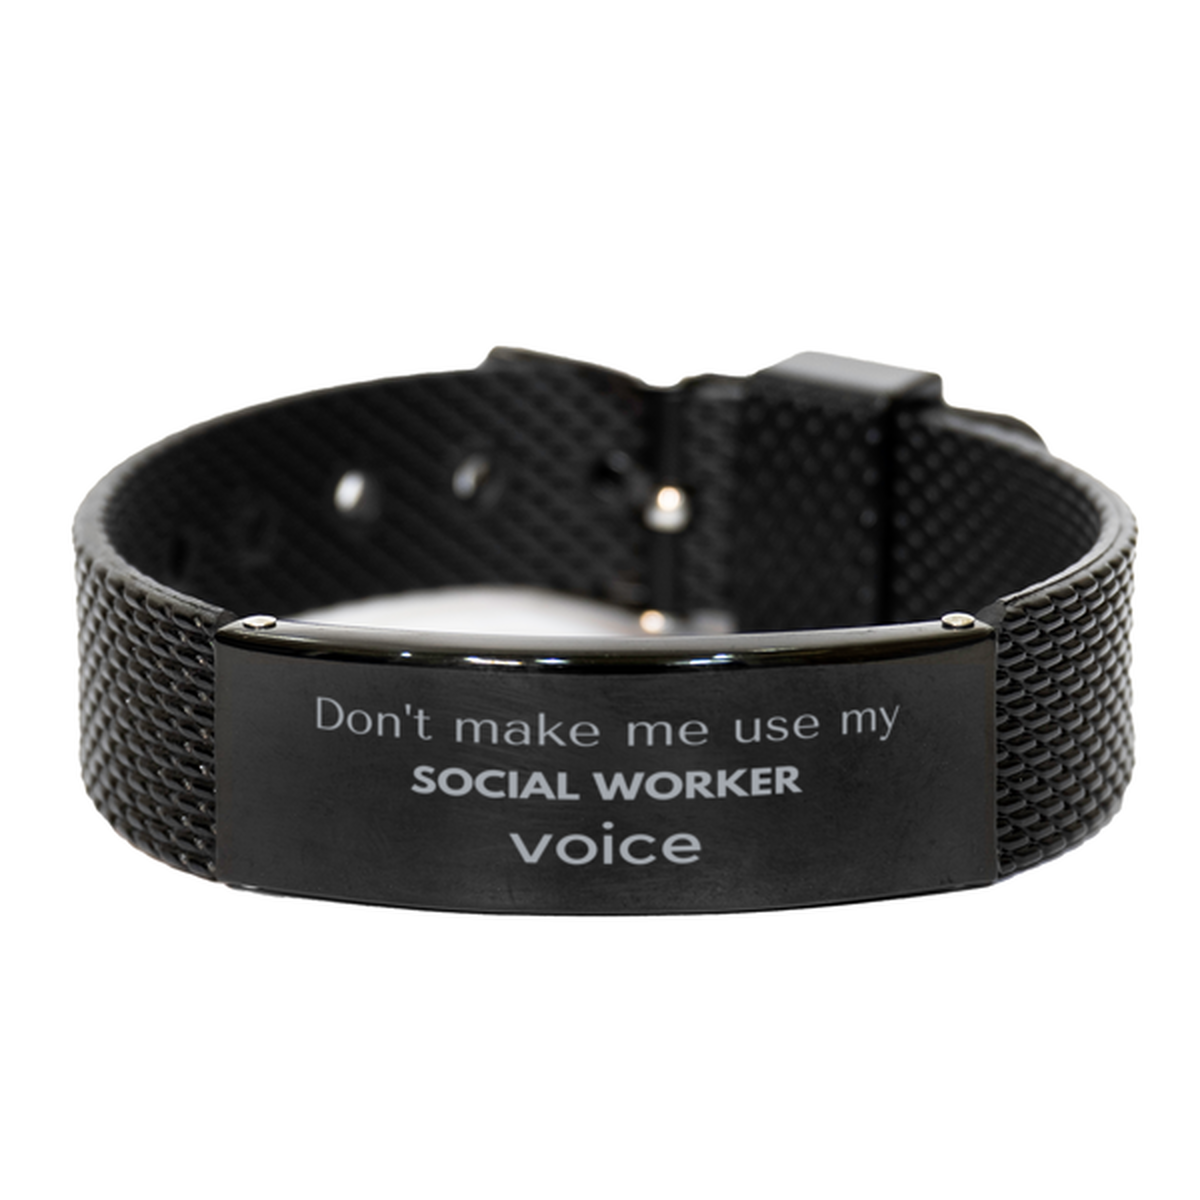 Don't make me use my Social Worker voice, Sarcasm Social Worker Gifts, Christmas Social Worker Black Shark Mesh Bracelet Birthday Unique Gifts For Social Worker Coworkers, Men, Women, Colleague, Friends